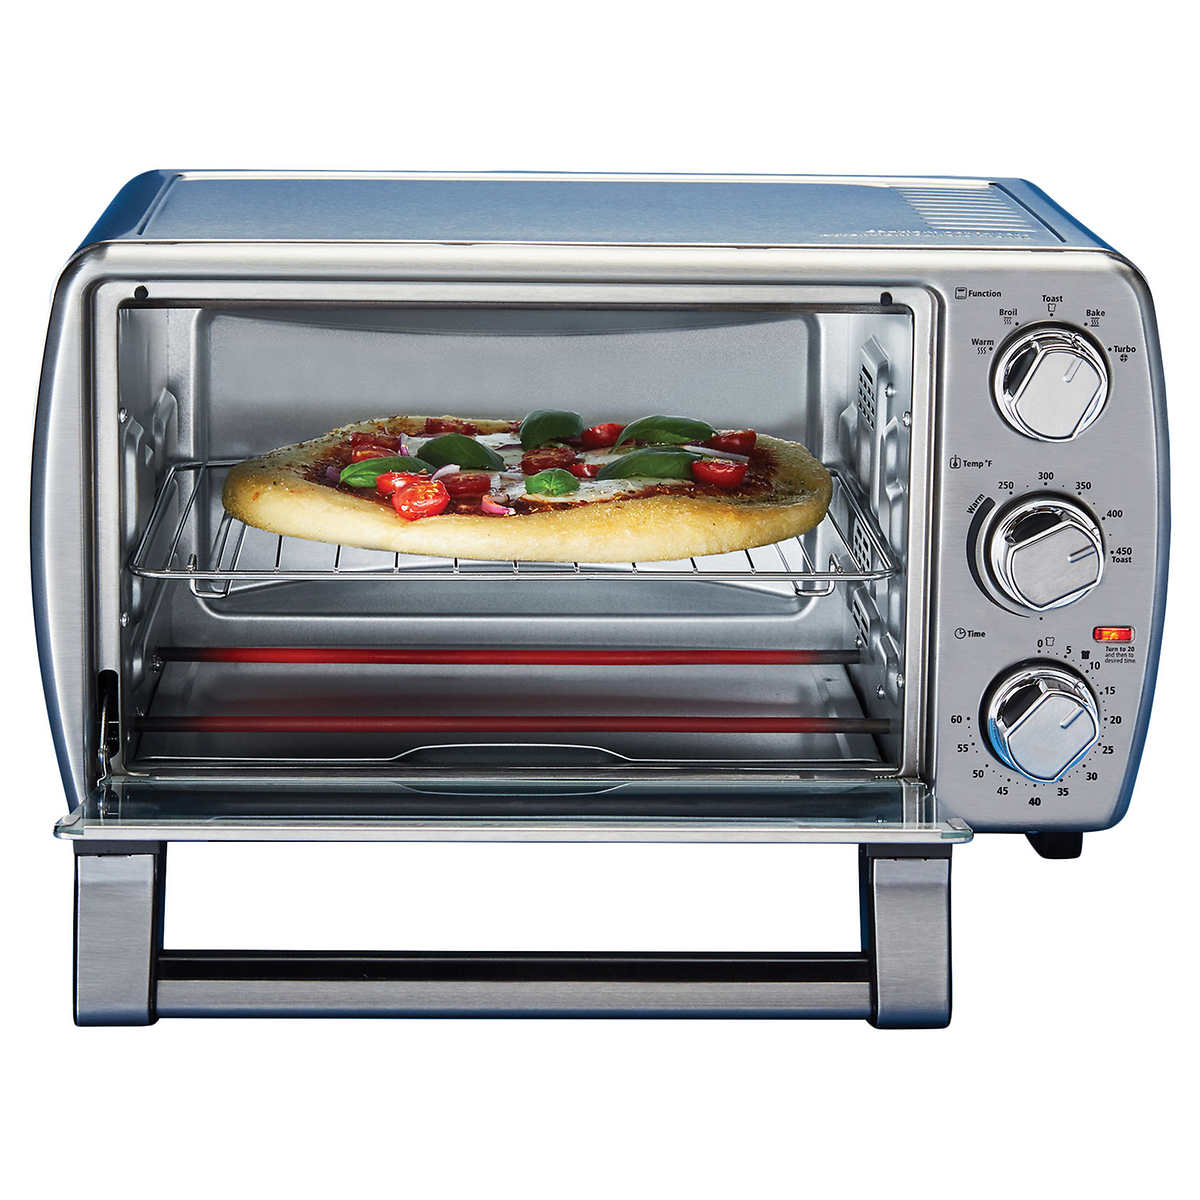 6 slice Oster Countertop Oven XL with Convection, Stainless Steel - UproMax